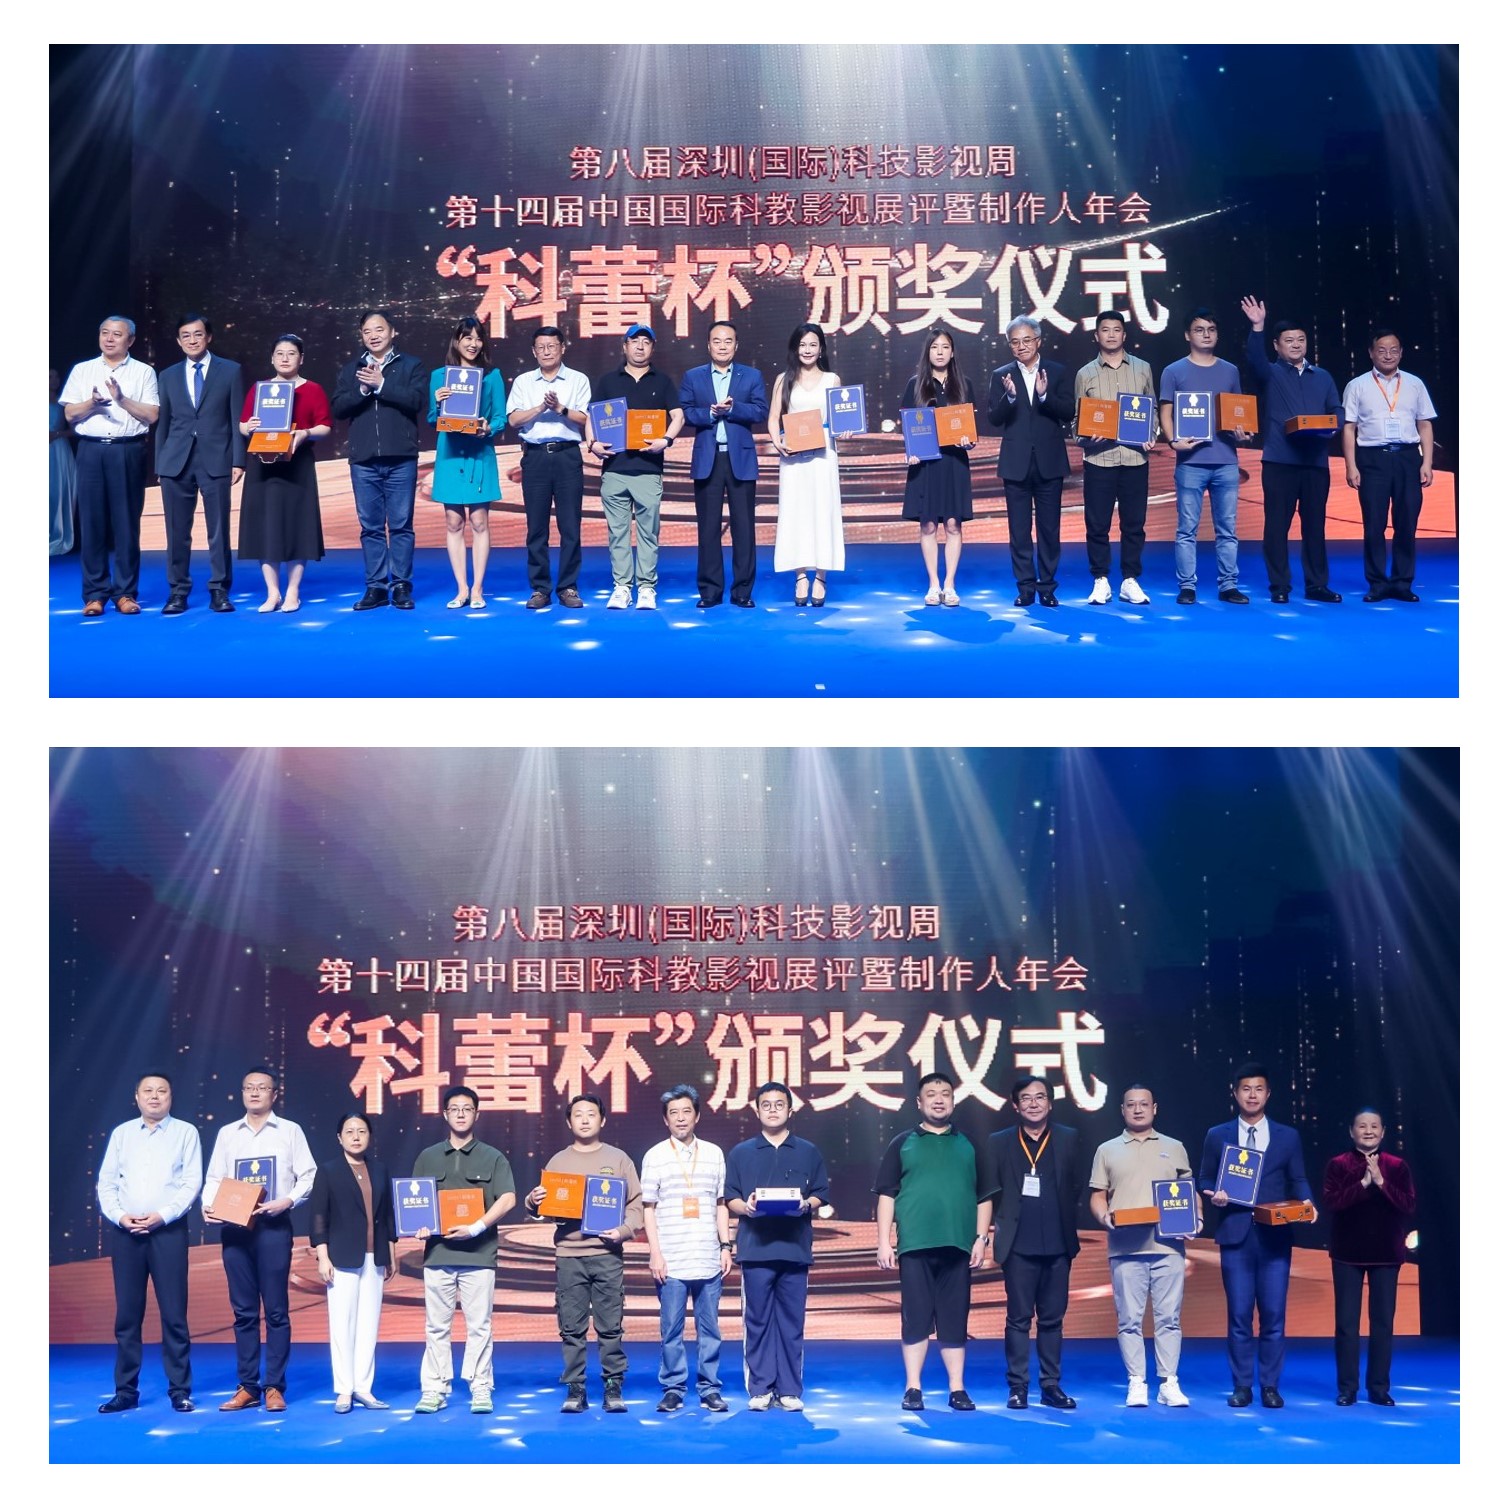 Mr Shun Chi-ming, former Director of the Hong Kong Observatory (top photo, second from left) and Dr Lai Wang-chun, Scientific Officer of the Observatory (bottom photo, second from right) attended the China Science Film and Video “Kelei Cup” award ceremony on 30 October 2023